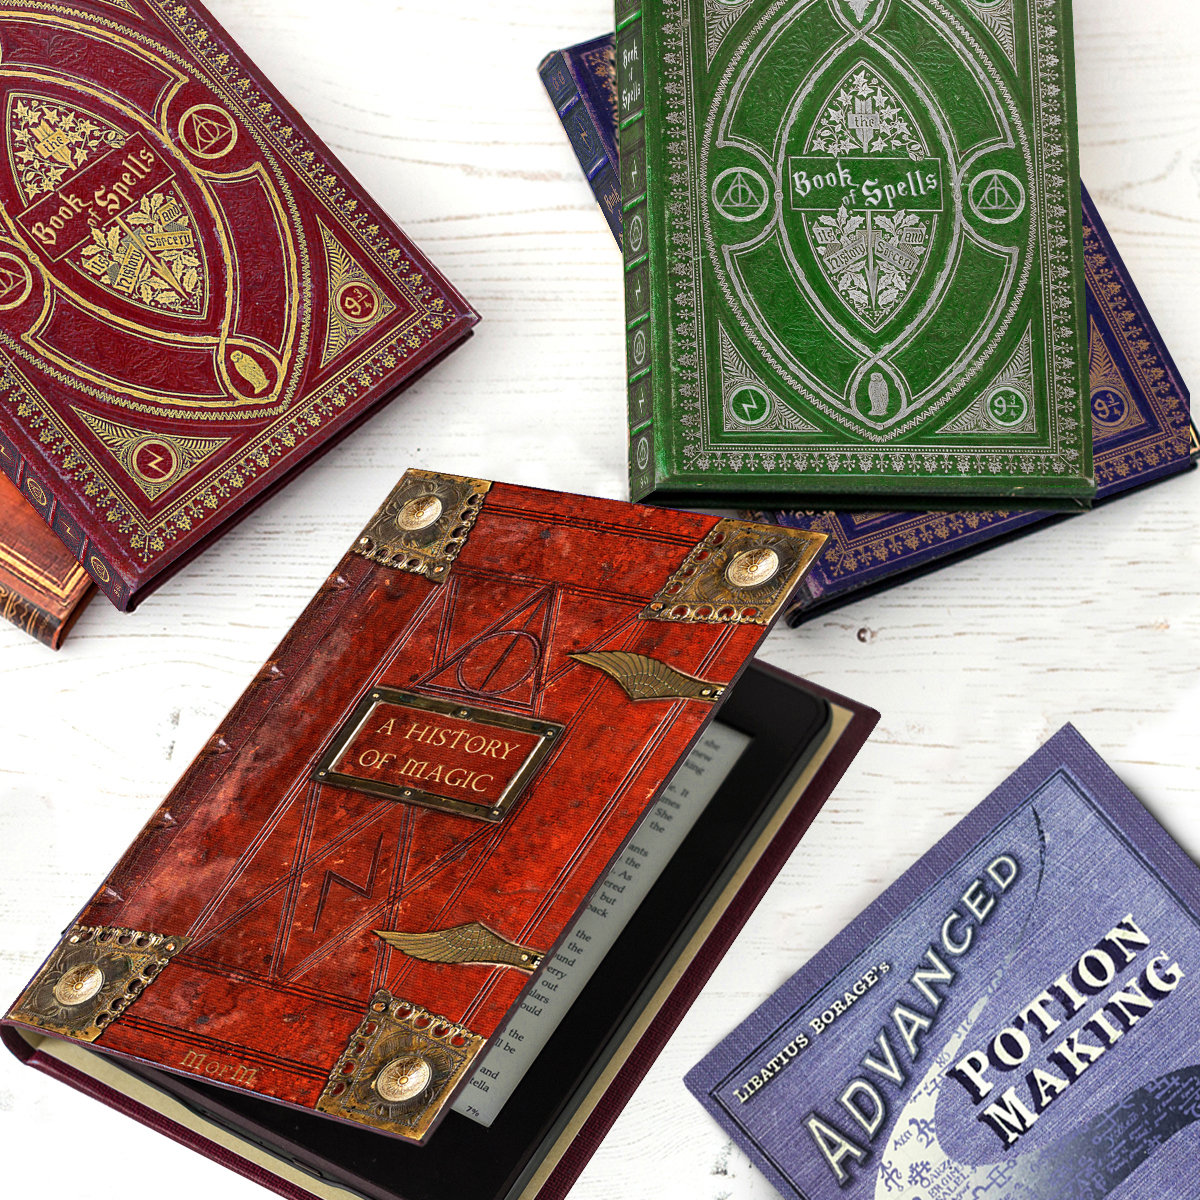 Klevercase Universal Kindle and Ereader or Tablet Case With Various Magic  and Hogwarts Inspired Book Cover Designs. 